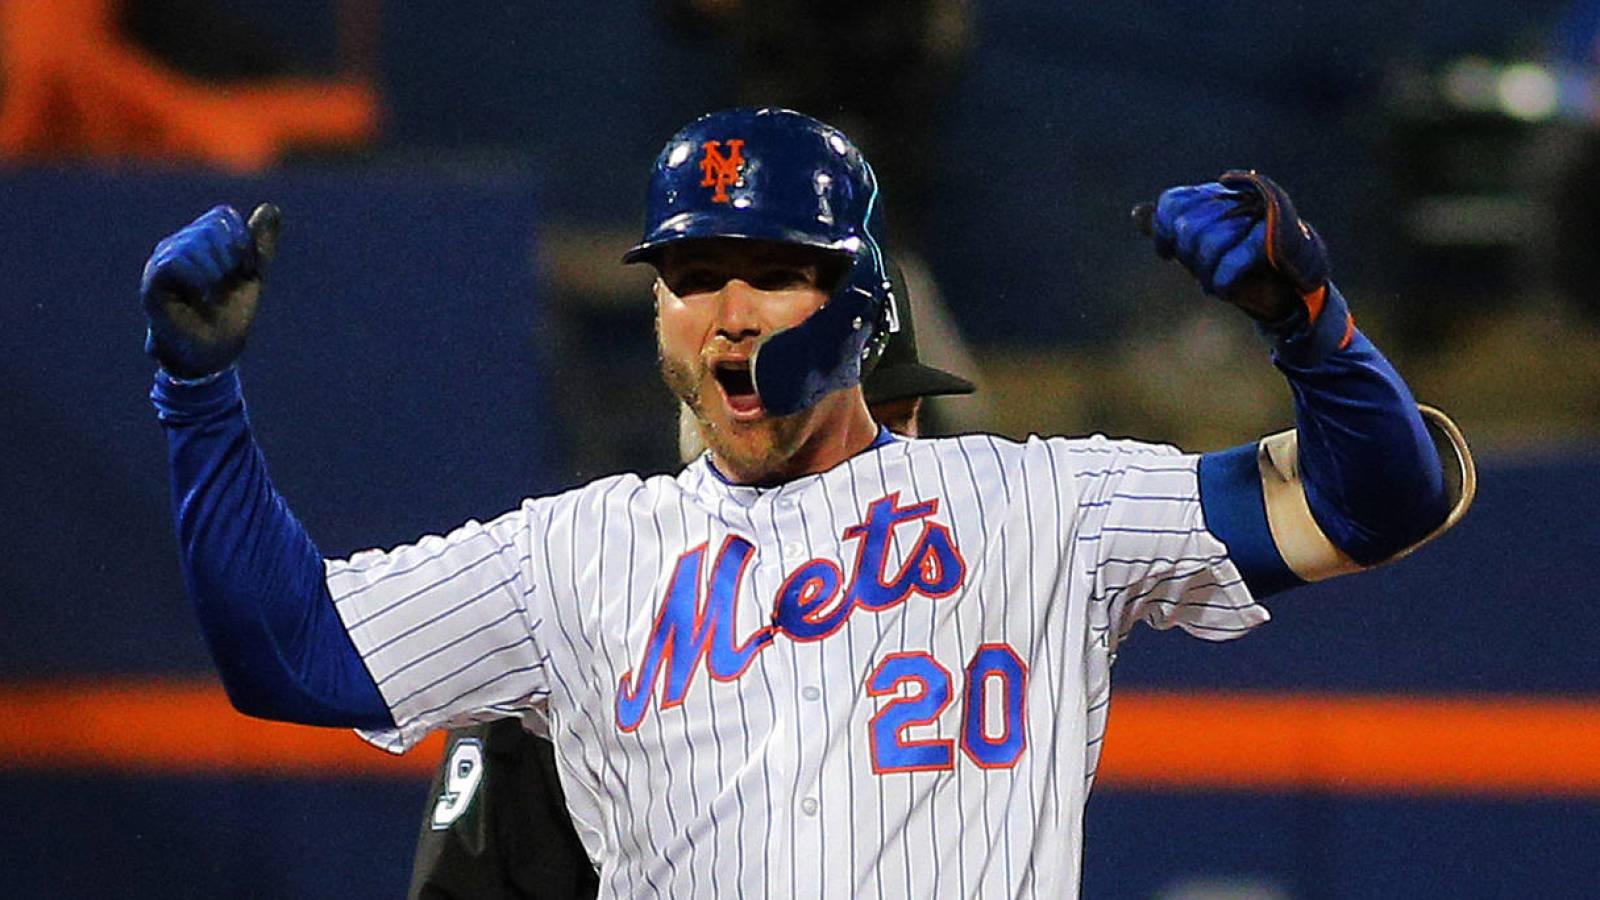 Pete Alonso ties NL rookie home run record after hitting